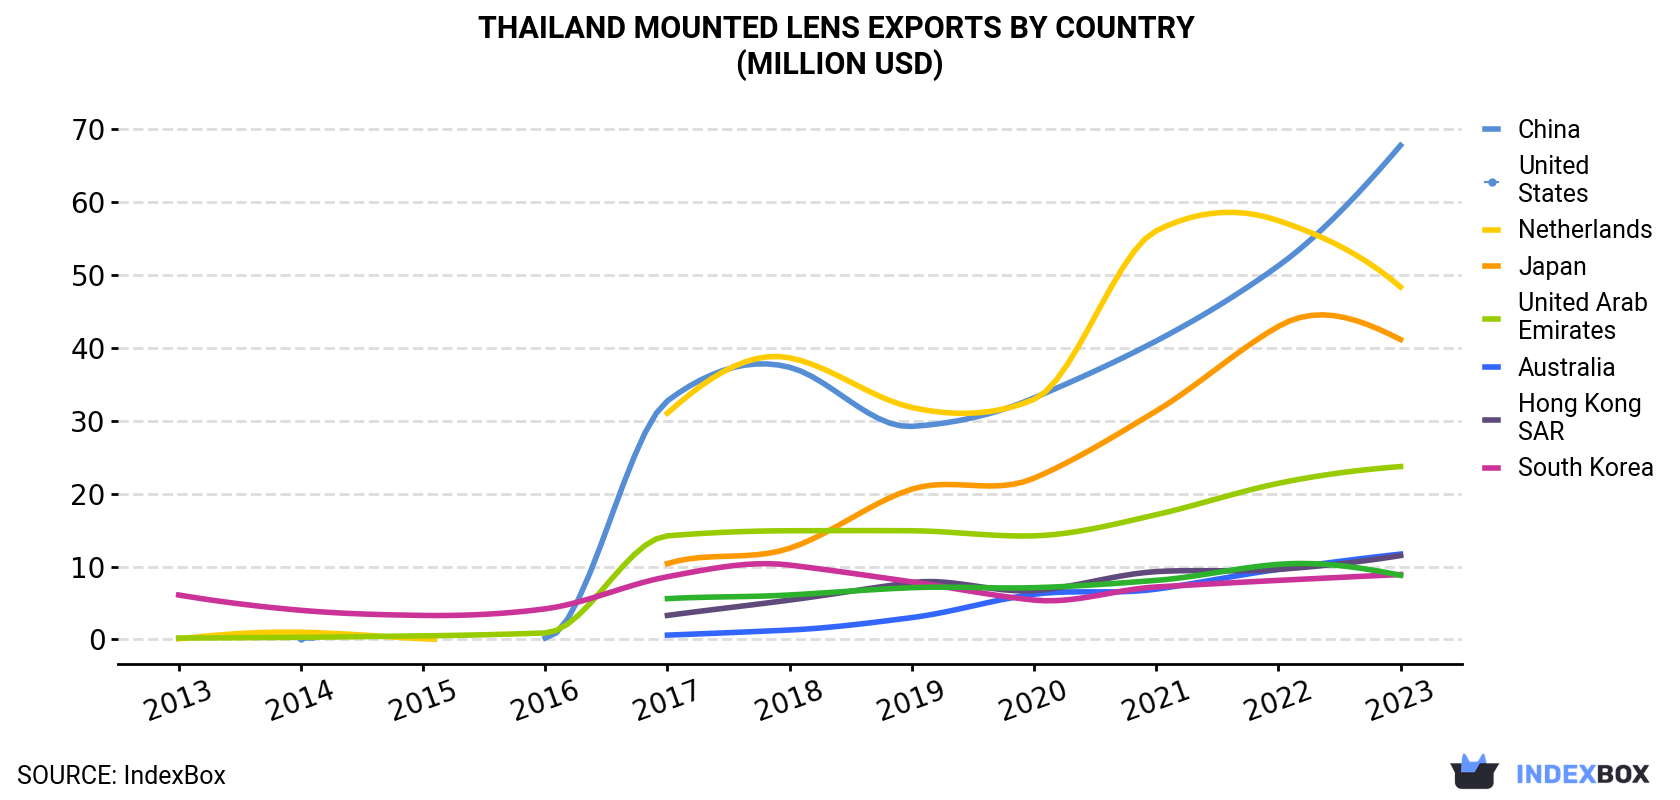 Thailand Mounted Lens Exports By Country (Million USD)